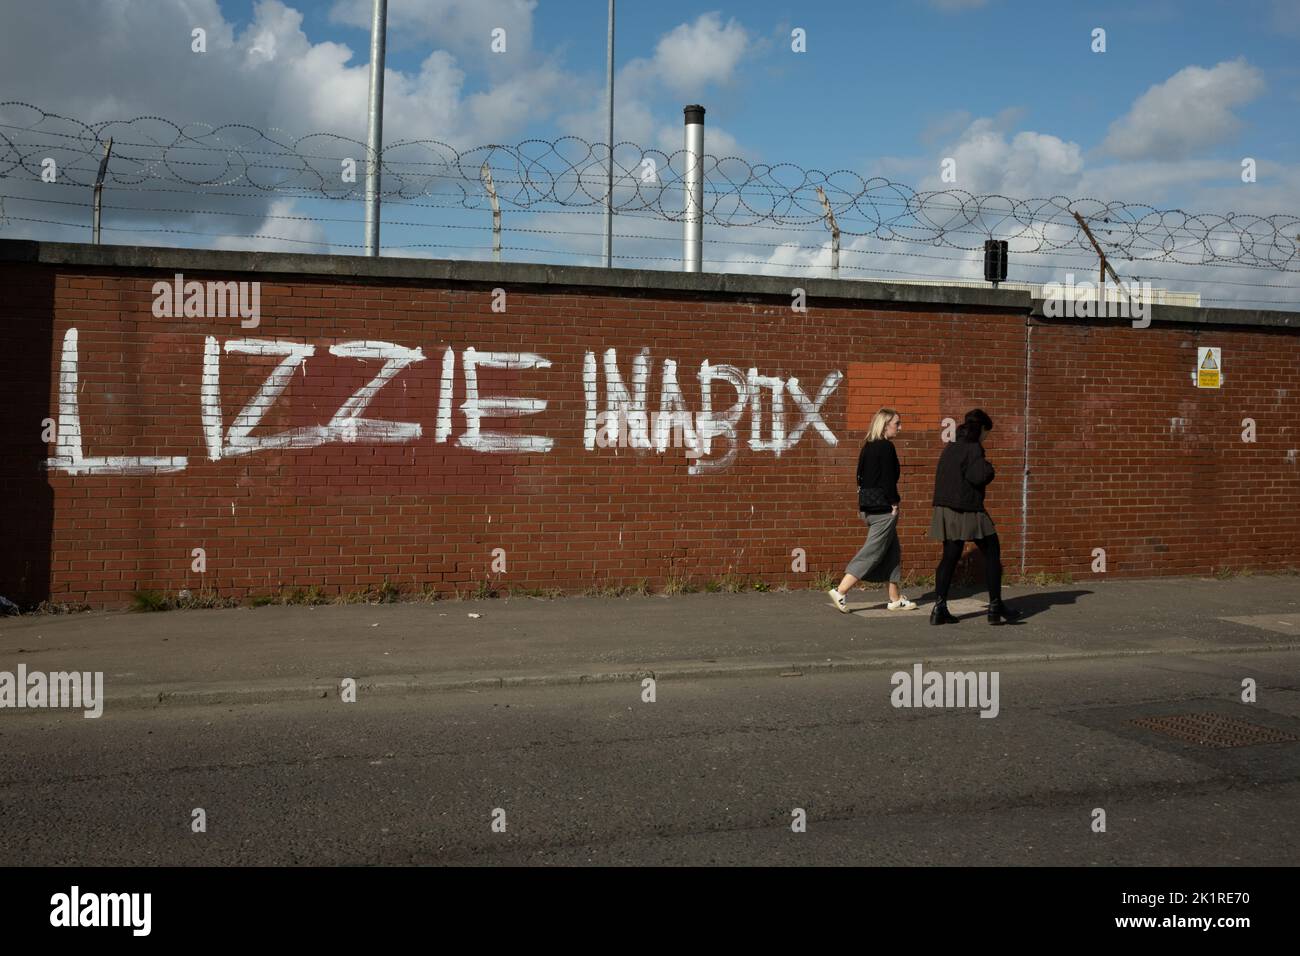 Glasgow Scotland, 20 September 2022. Anti-monarchy graffiti reading “Lizzie in a box”, which appeared overnight in the Ibrox area of the city, on the day after the funeral of Her Majesty Queen Elizabeth II who died on 8th September, in Glasgow Scotland, 20 September 2022. Photo credit: Jeremy Sutton-Hibbert/Alamy Live News. Stock Photo